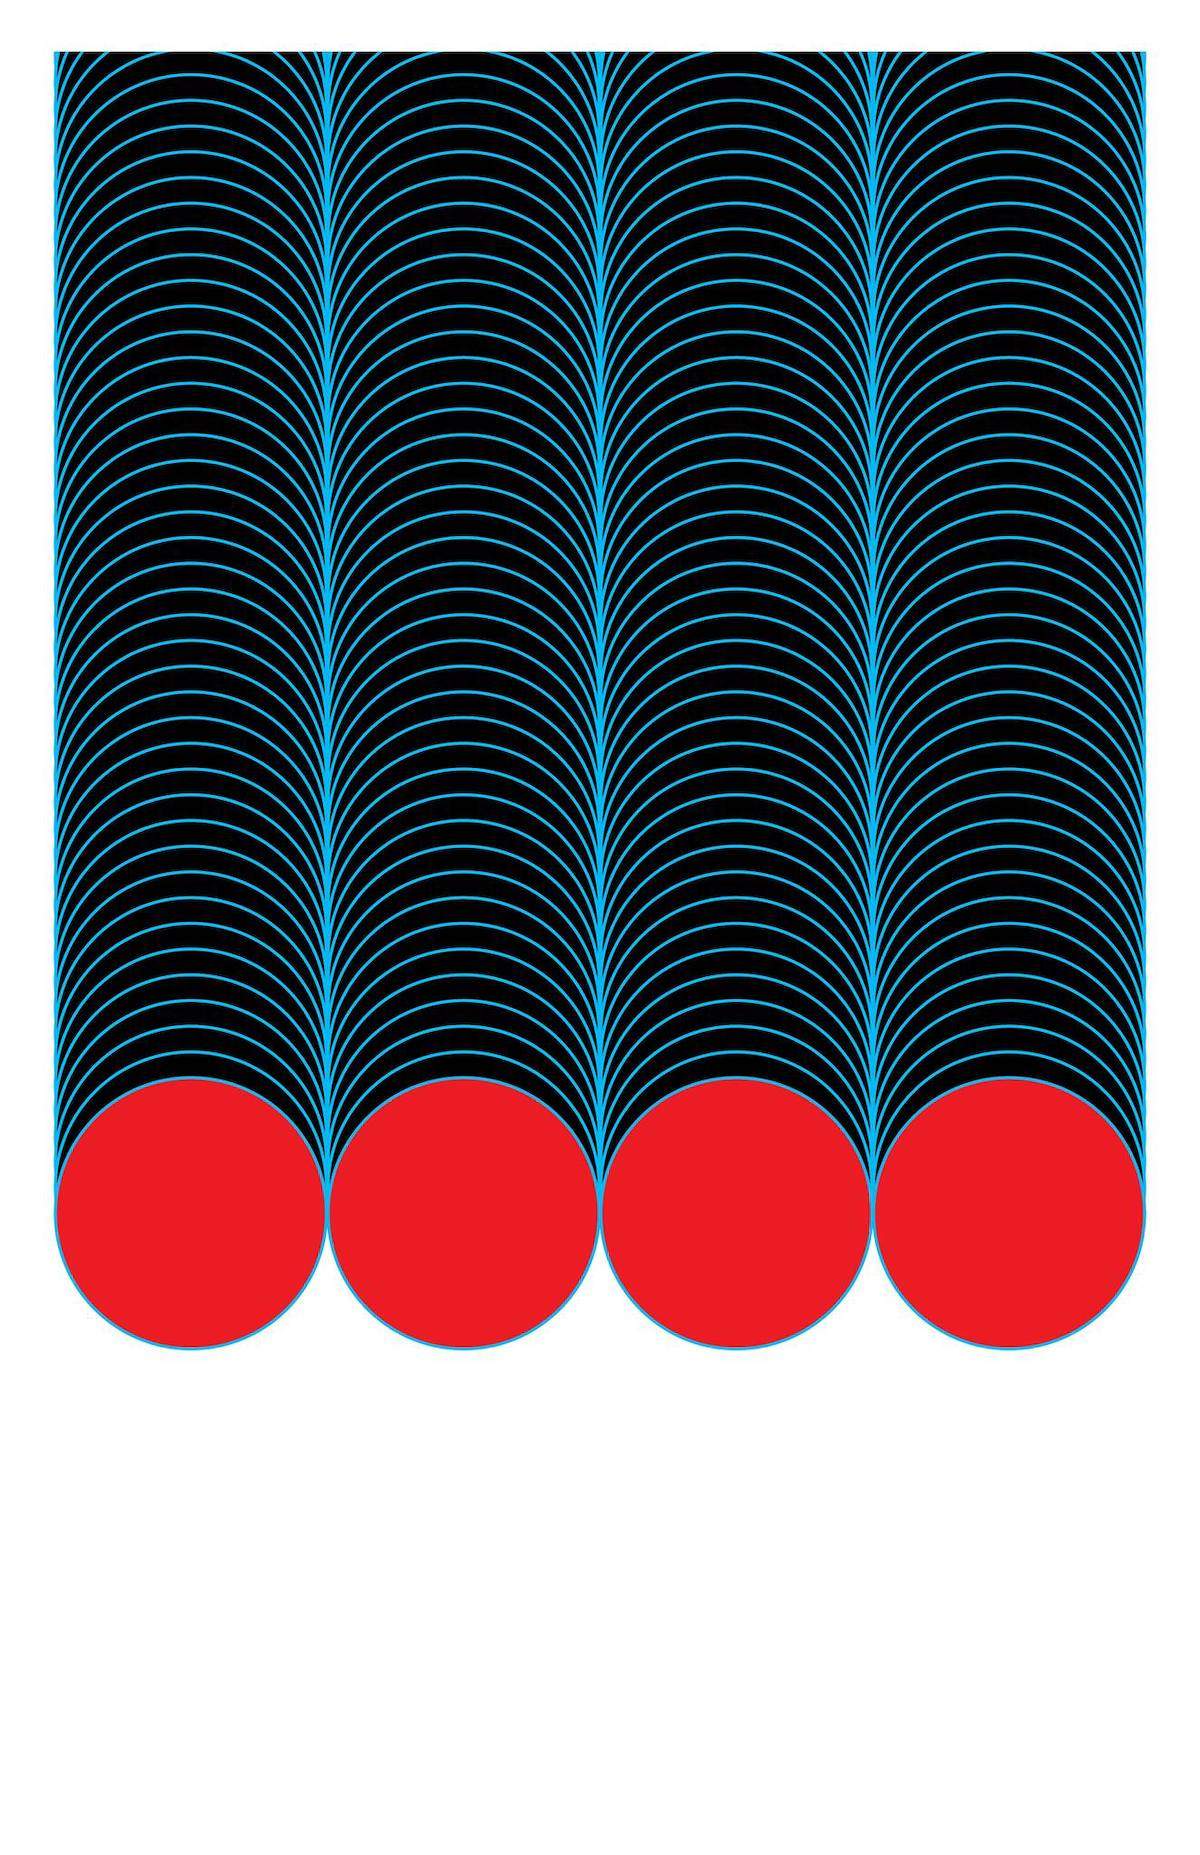 Neon blue, black and red circular optical illusion